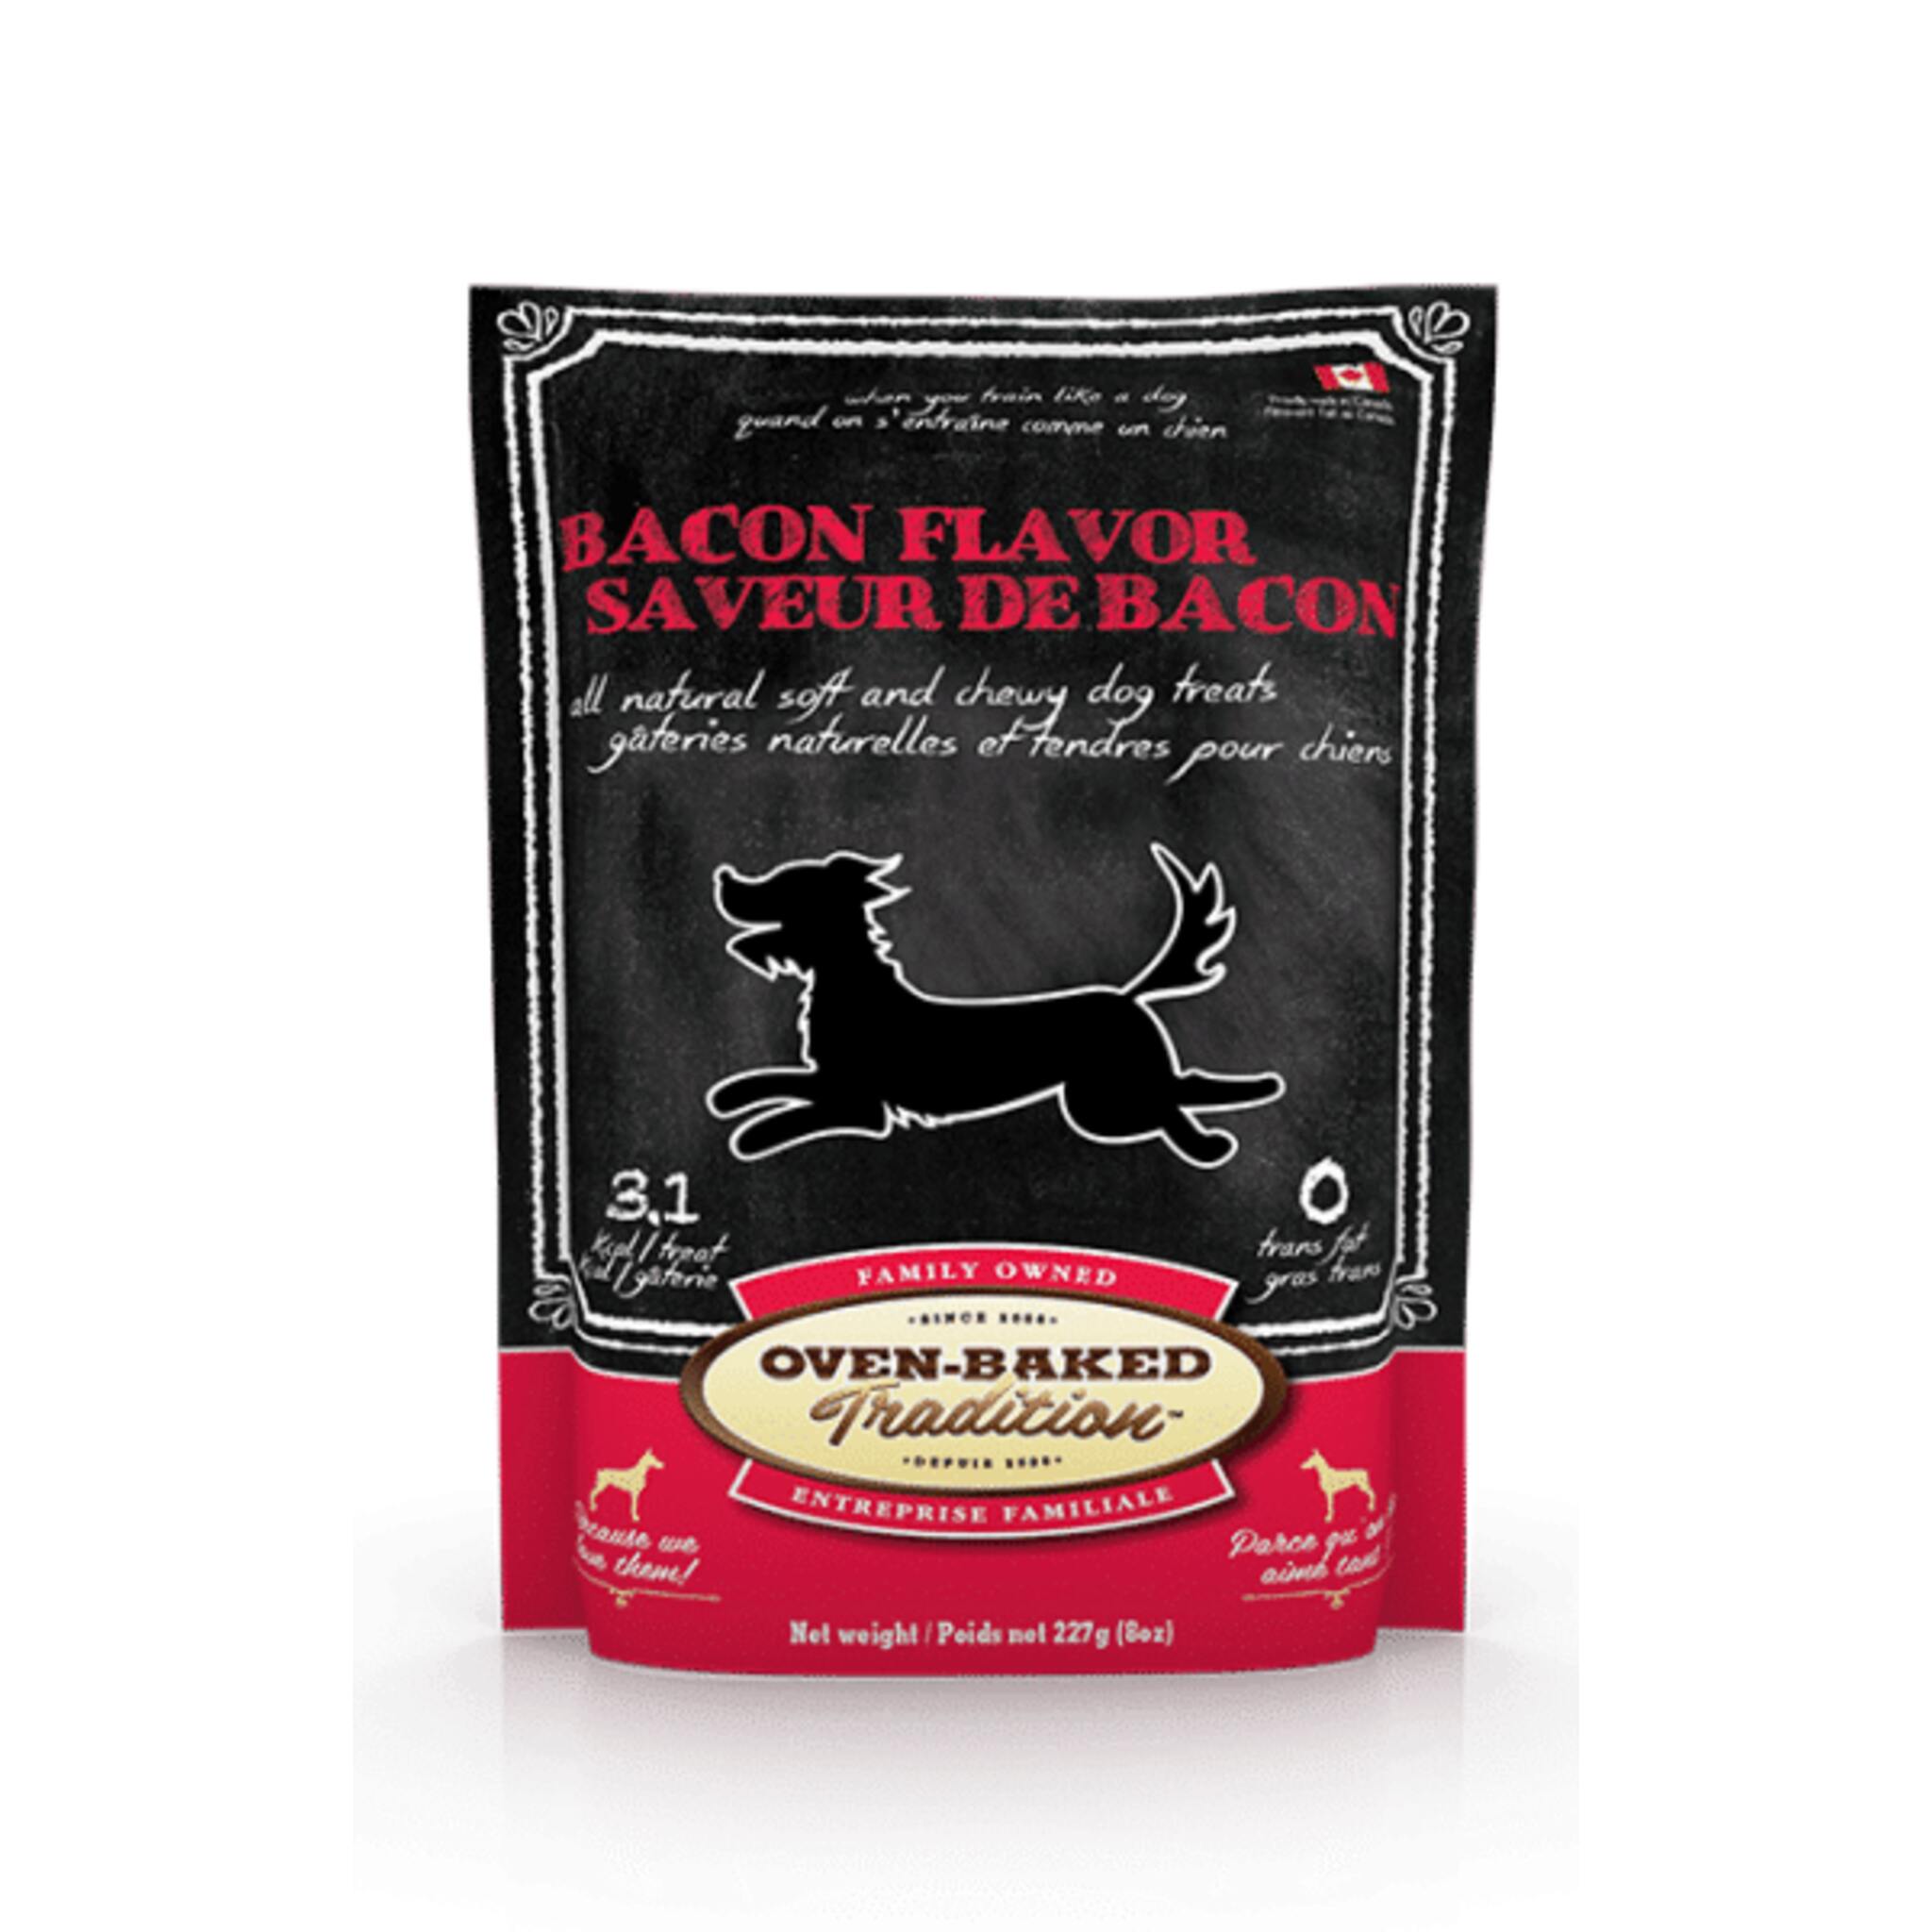 A bag of Oven-Baked Tradition soft and chewy dog treats, bacon flavour, 8 oz.